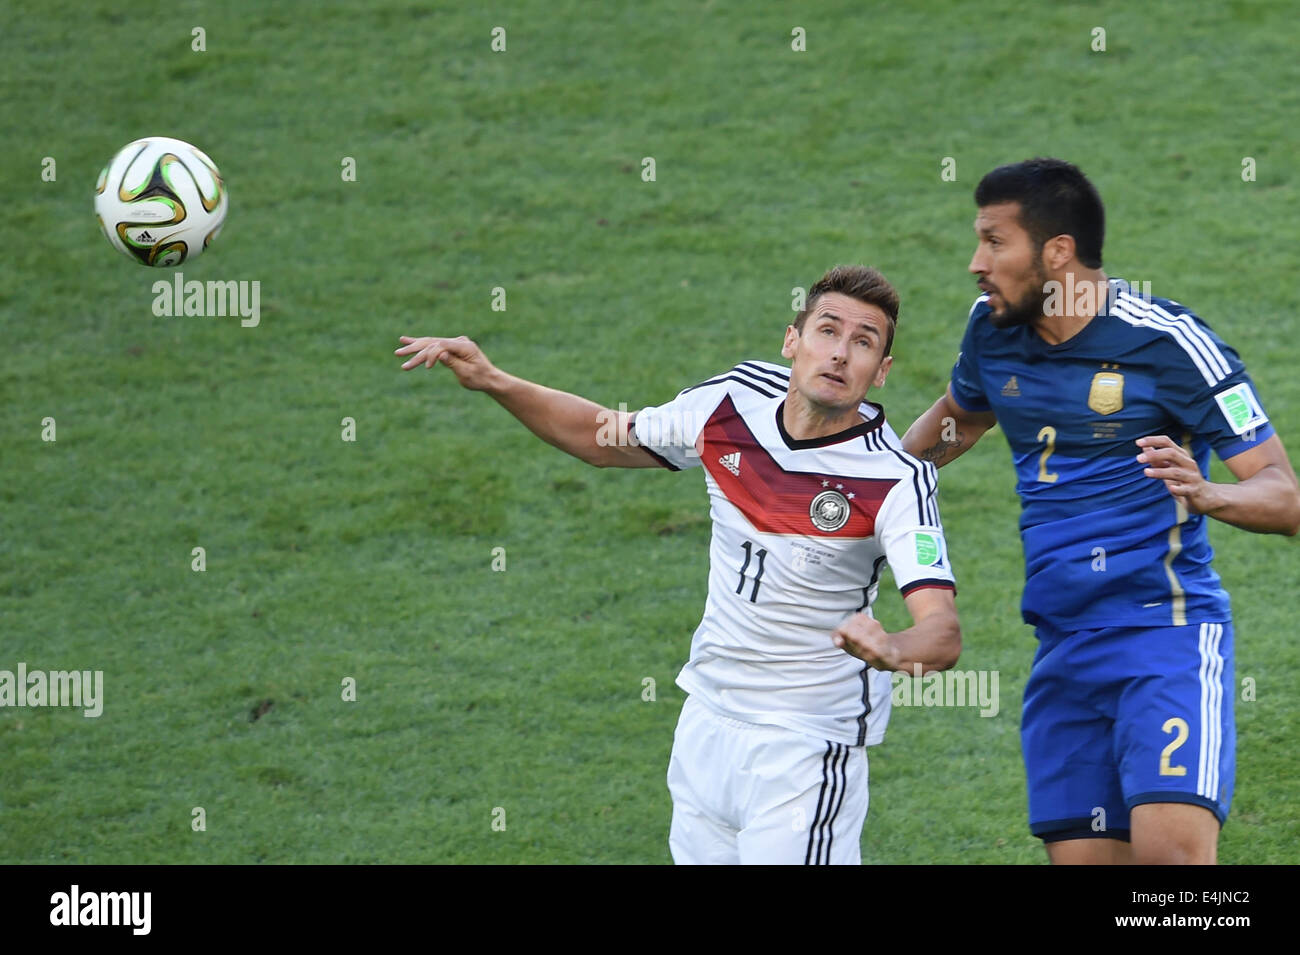 Rio De Janeiro, Brazil. 13th July, 2014. Germany's Miroslav Klose (L) vies with Argentina's Ezequiel Garay during the final match between Germany and Argentina of 2014 FIFA World Cup at the Estadio do Maracana Stadium in Rio de Janeiro, Brazil, on July 13, 2014. Credit:  Li Ga/Xinhua/Alamy Live News Stock Photo